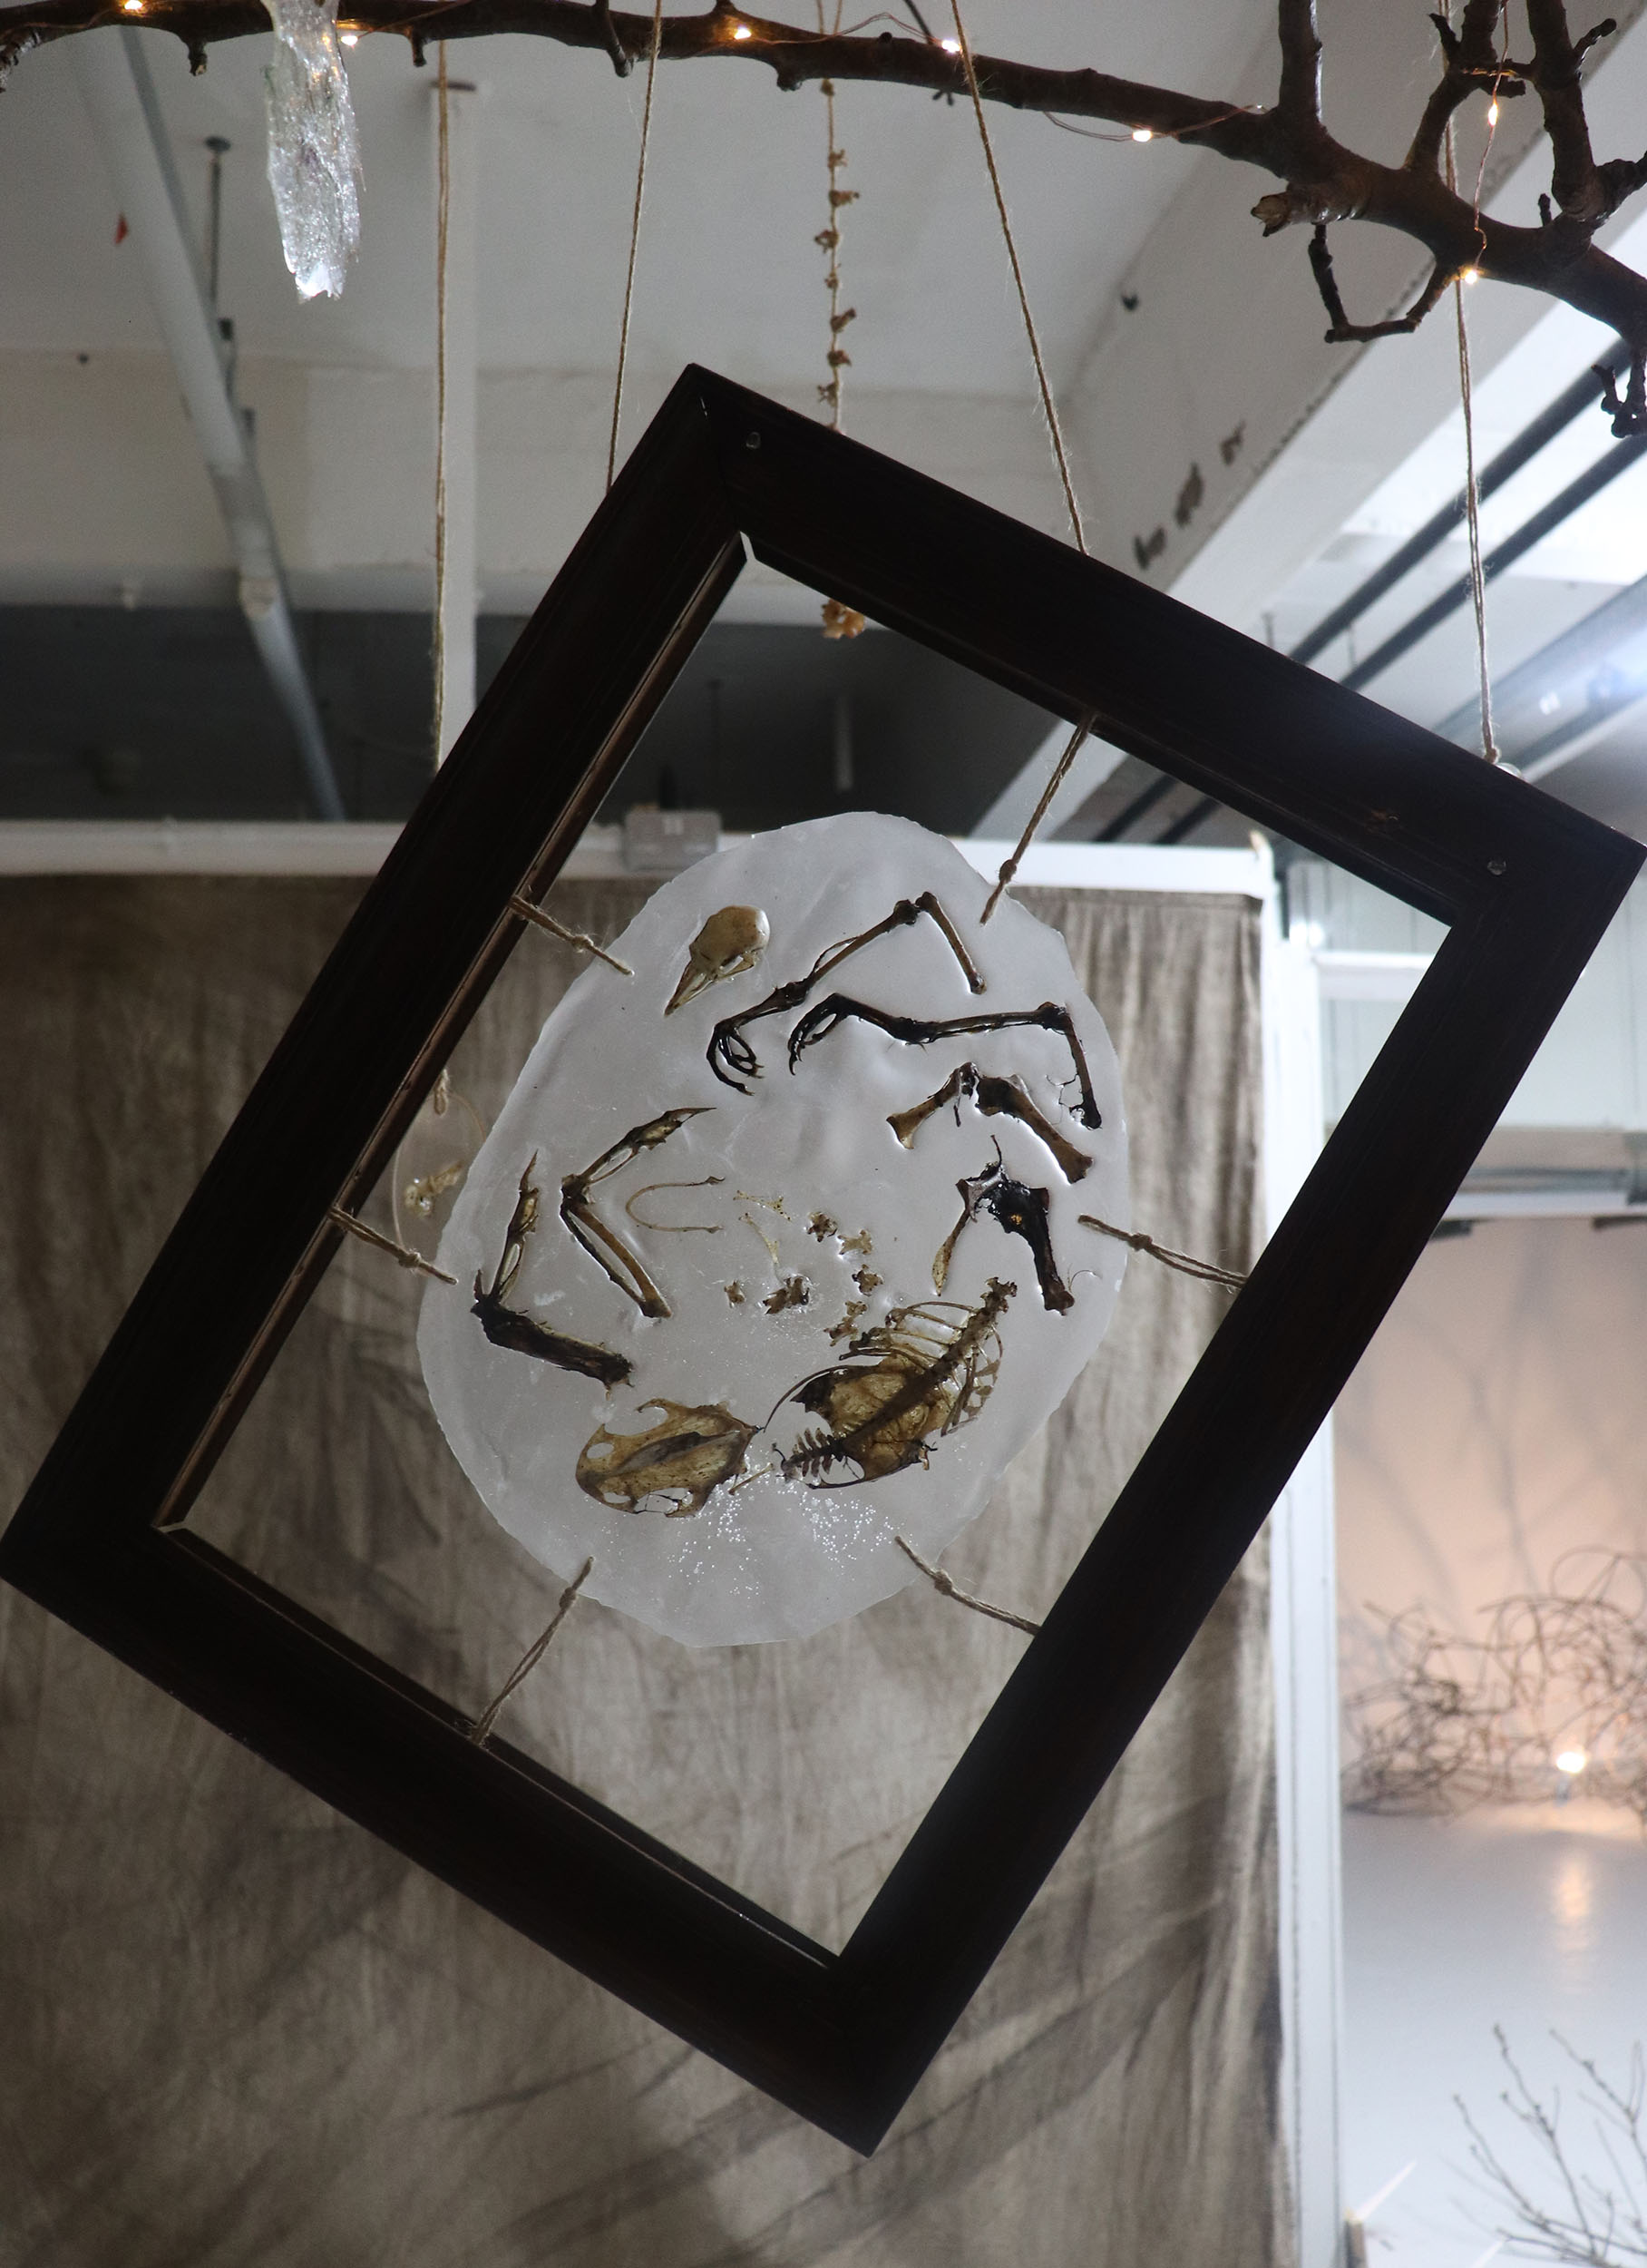 Free hanging artwork by Zoë Bullen, displaying skeletal remains with some feathers, of a cat caught pigeon, arranged in resin, and suspended within an old wooden picture frame.